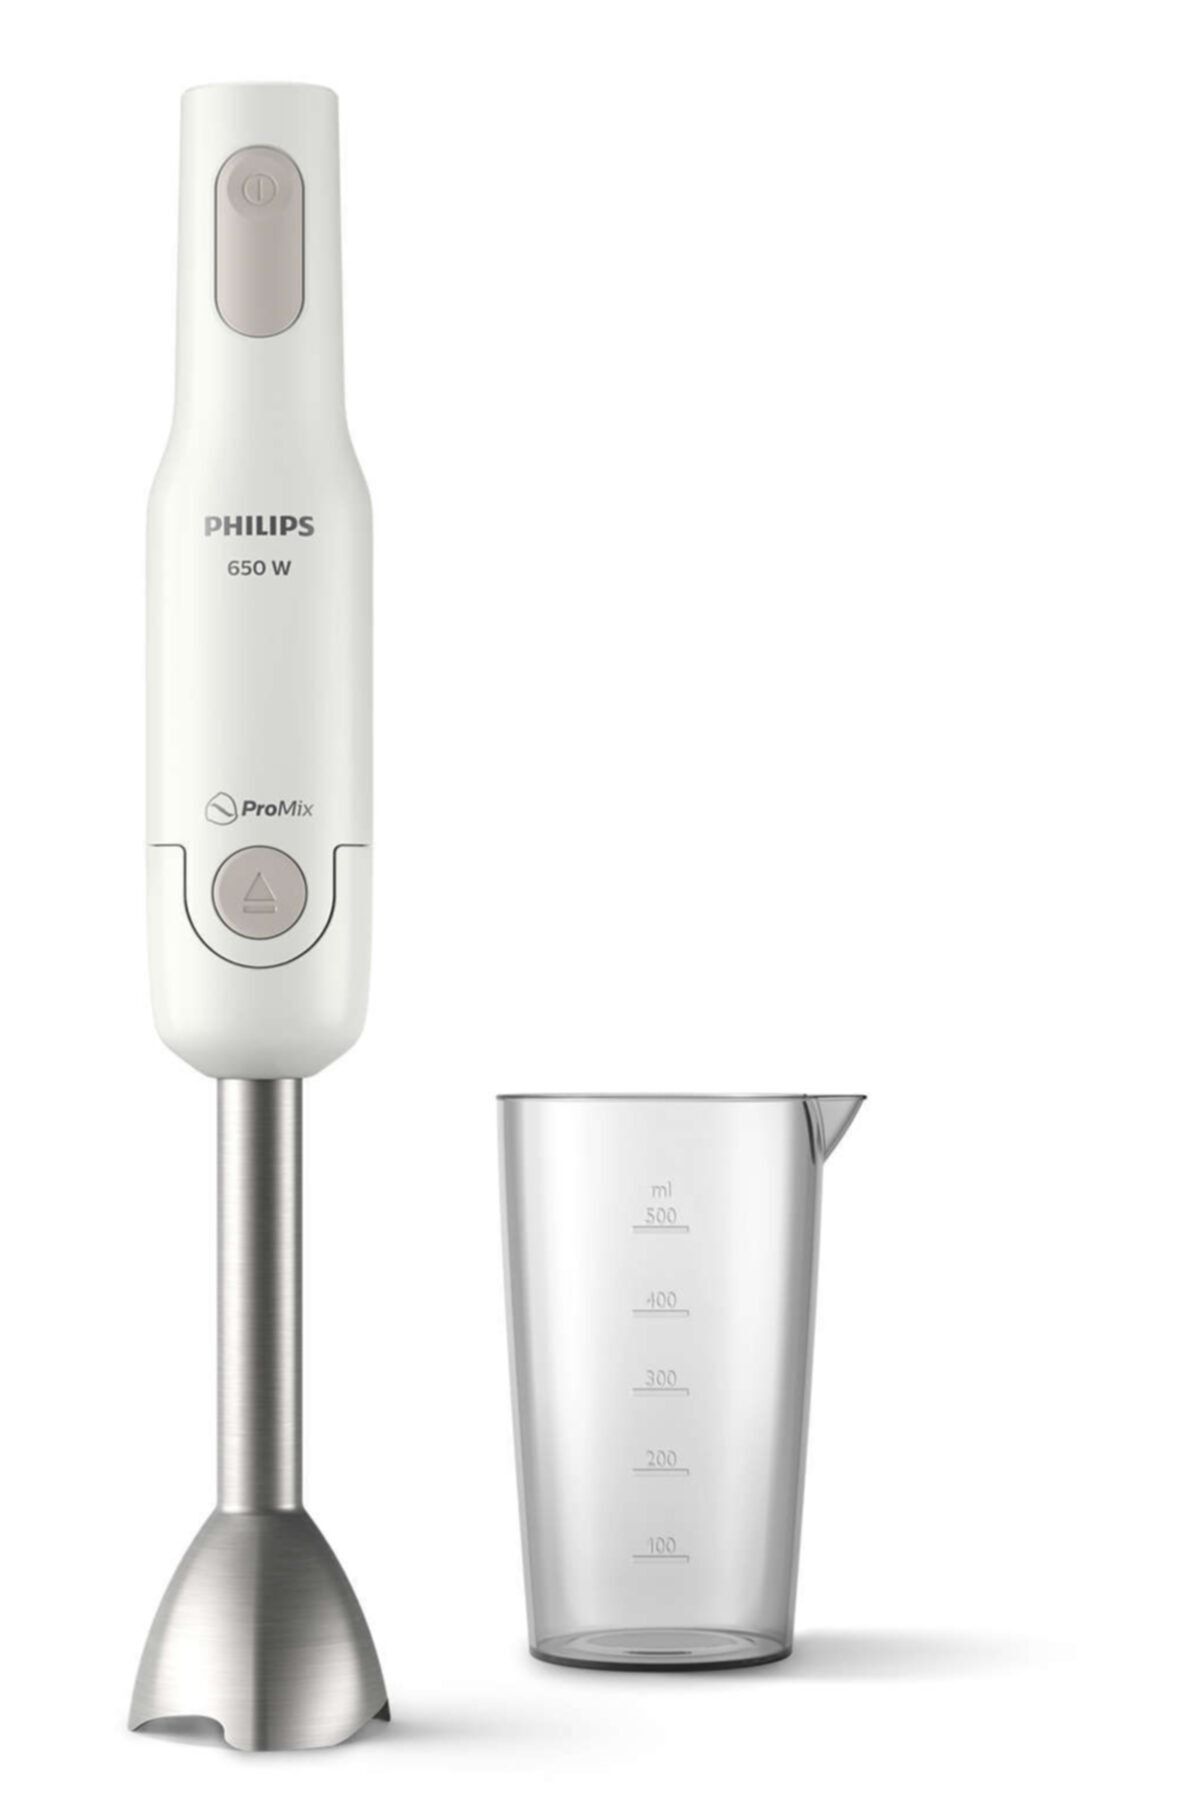 Philips Promix HR2534/00 El Blenderı 650 W Daily Collection